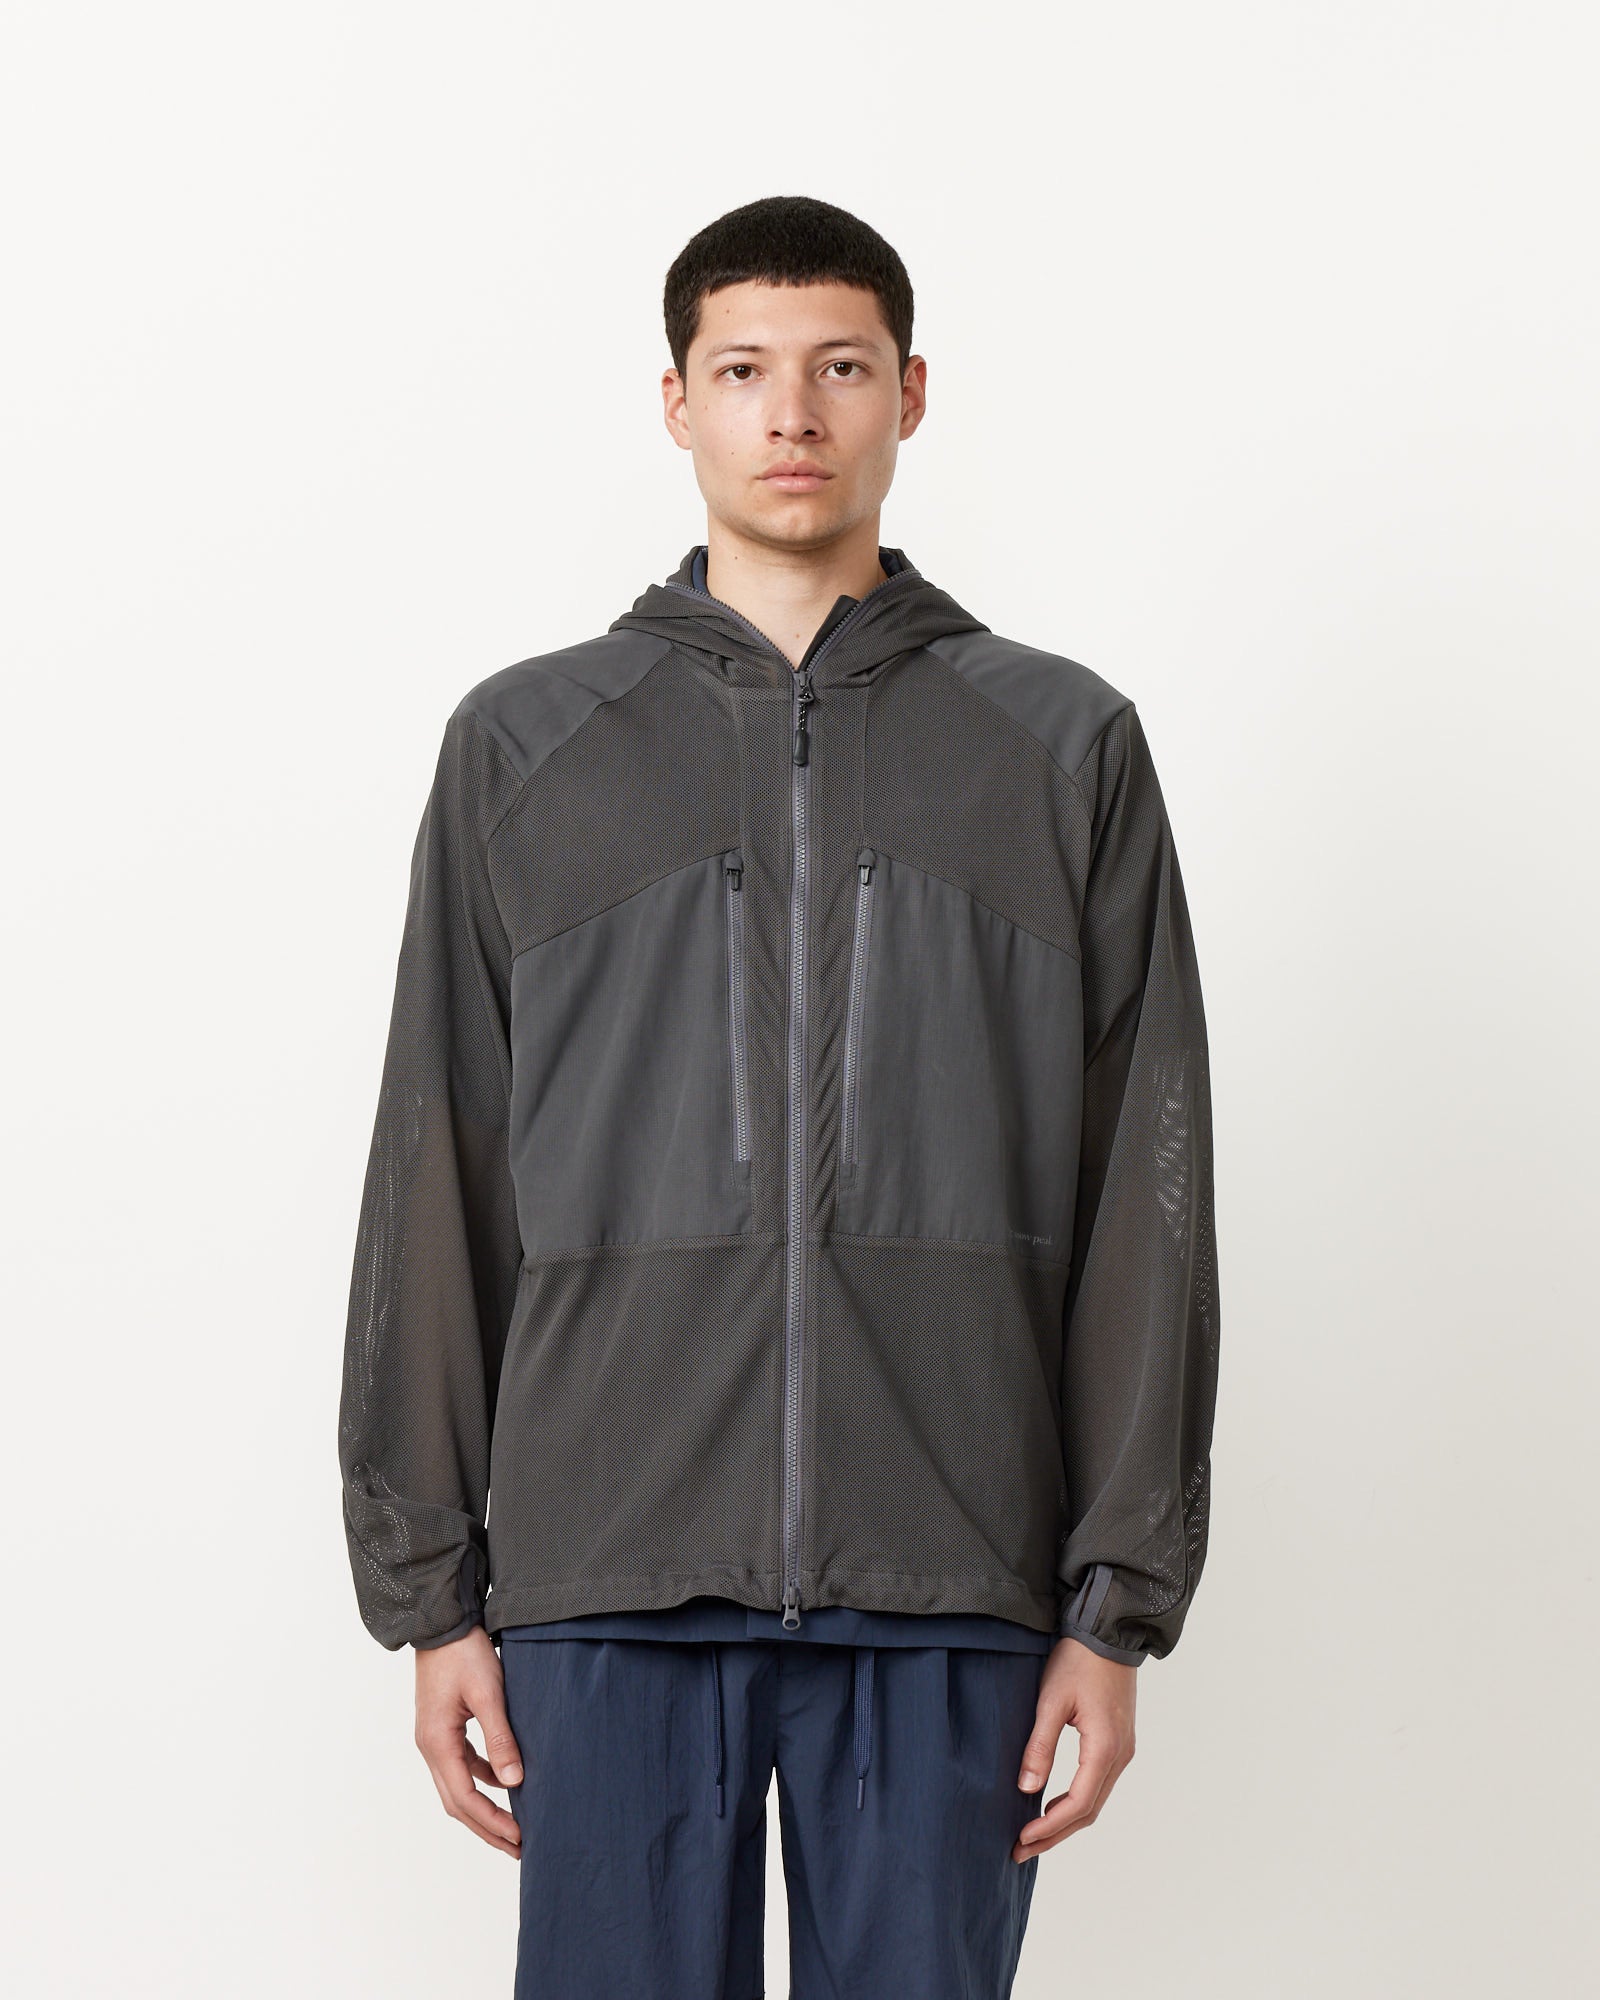 Insect Shield Mesh Jacket in Charcoal